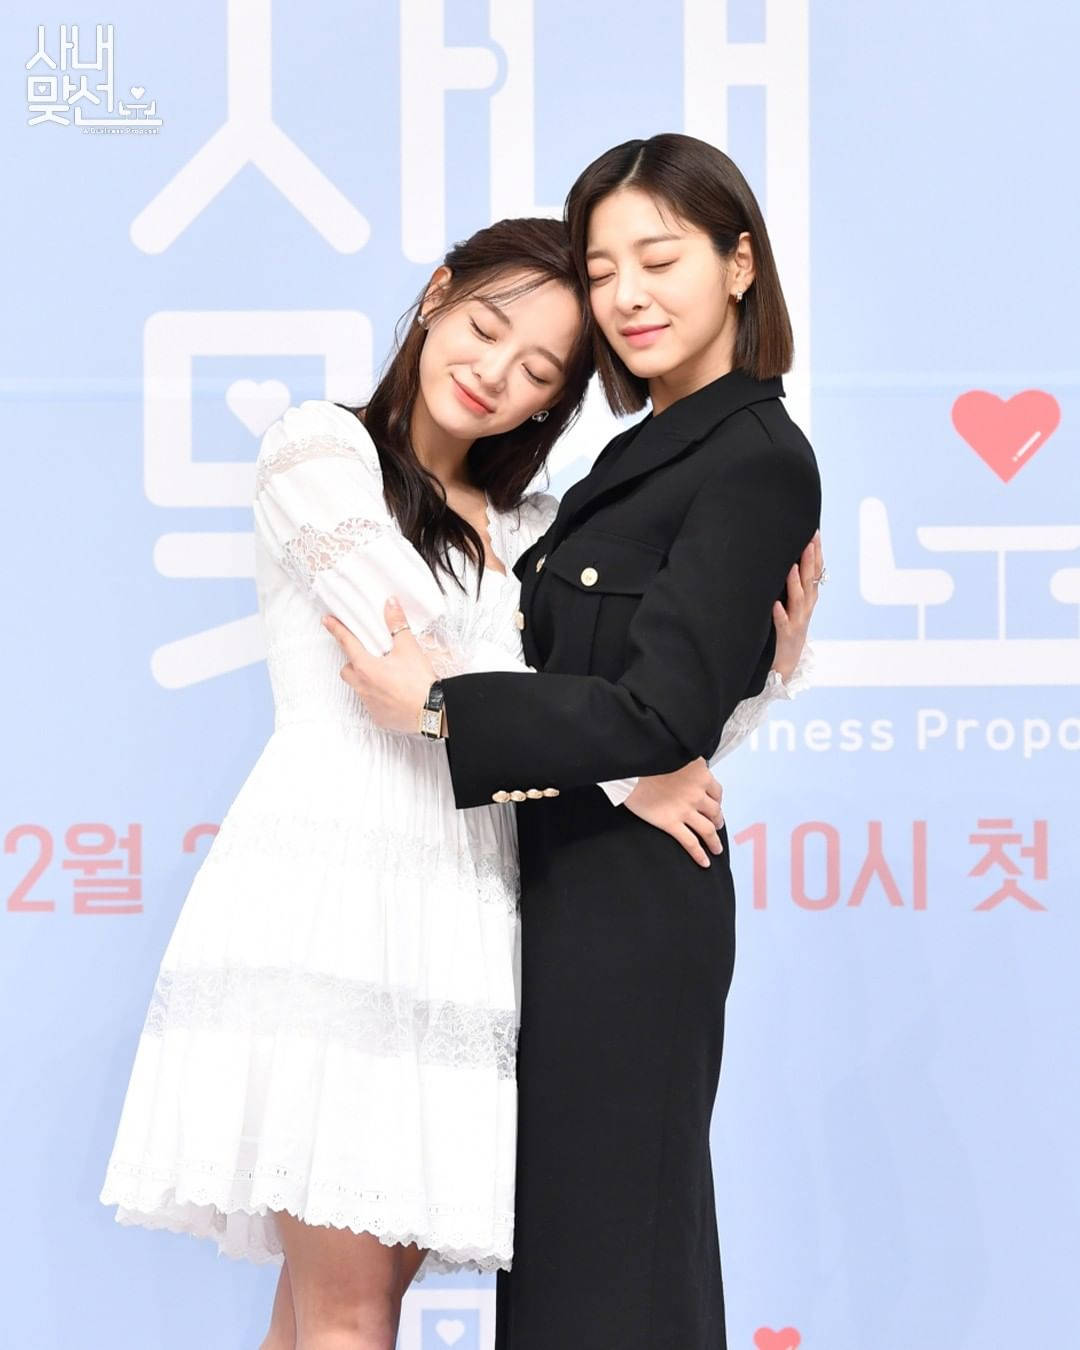 Young-seo And Ha-ri Business Proposal Bestfriends